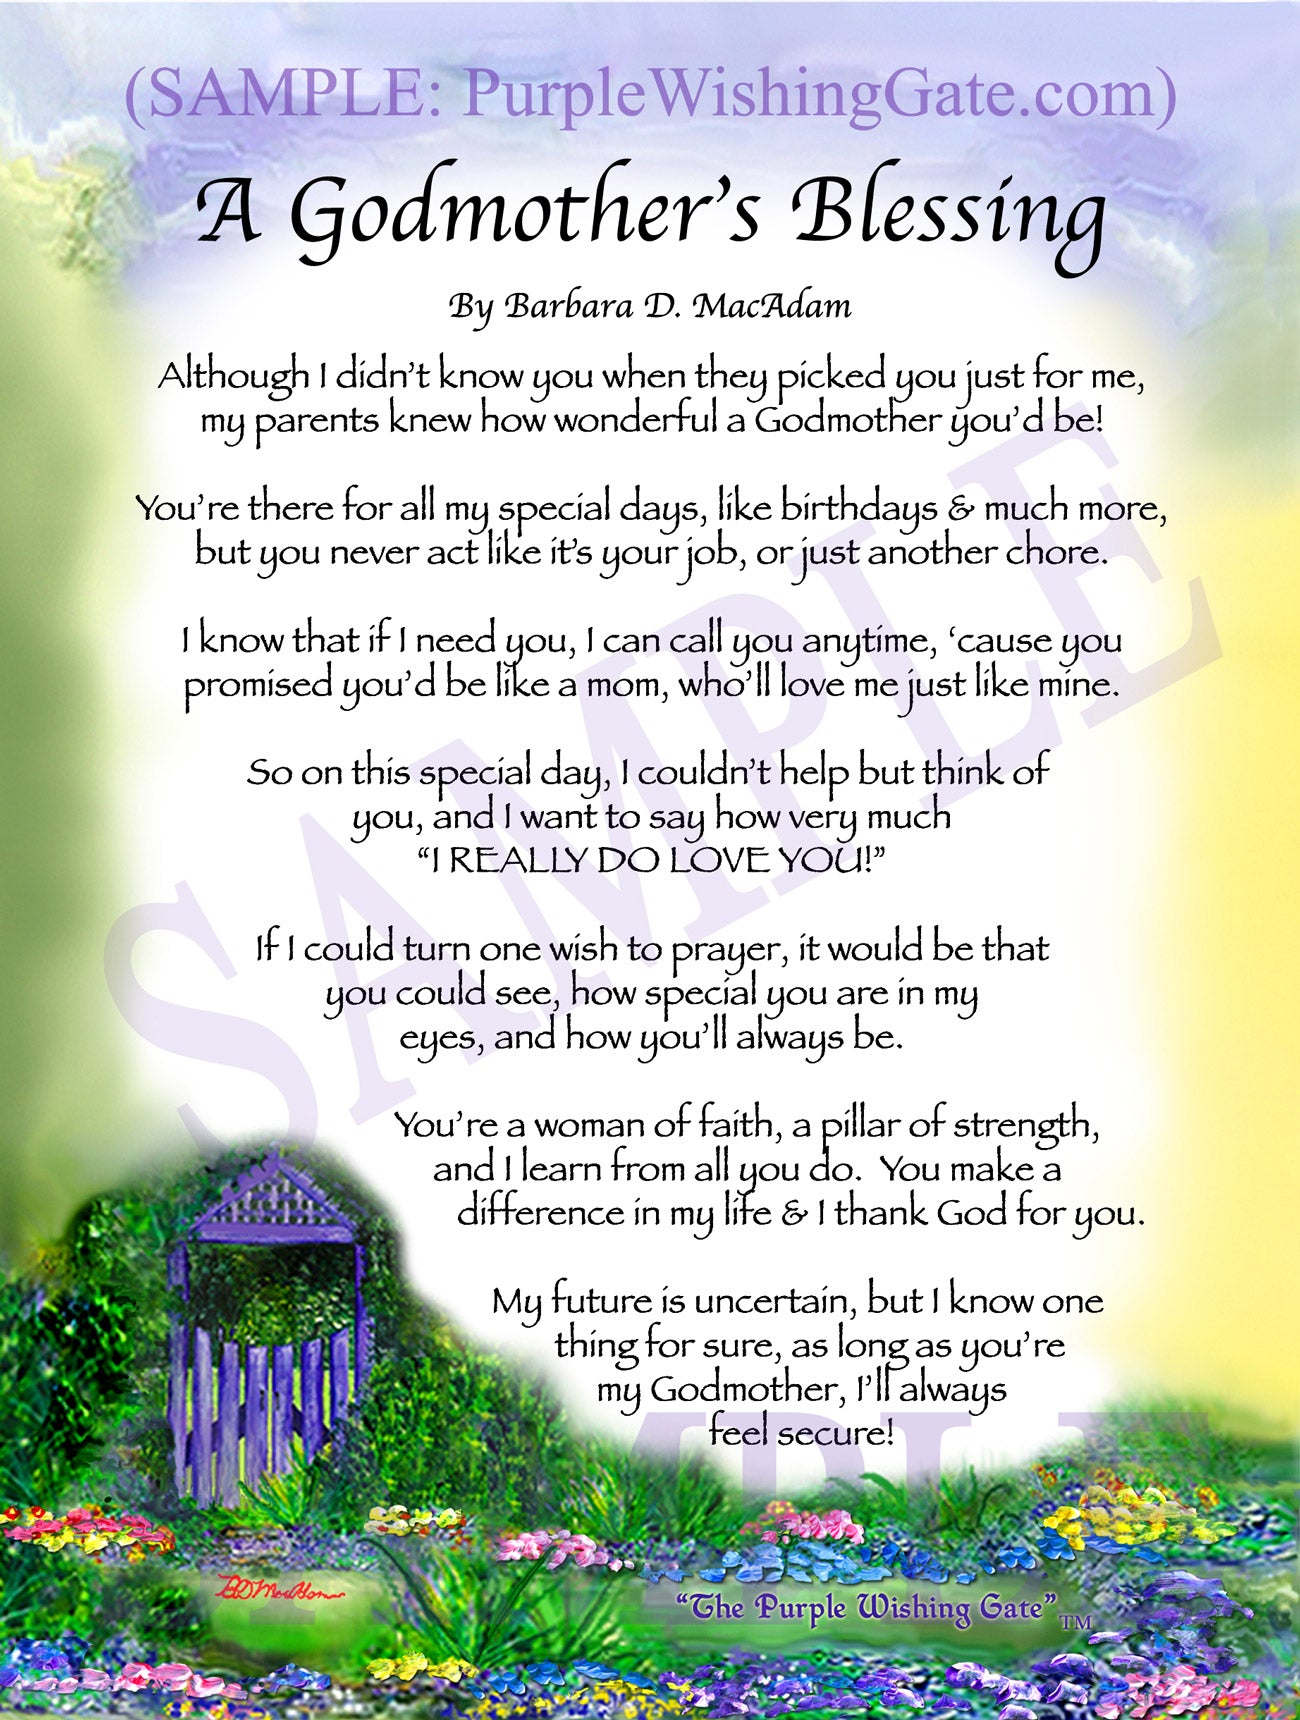 
              
        		A Godmother&#39;s Blessing - Gifts for Godmother - PurpleWishingGate.com
        		
        	